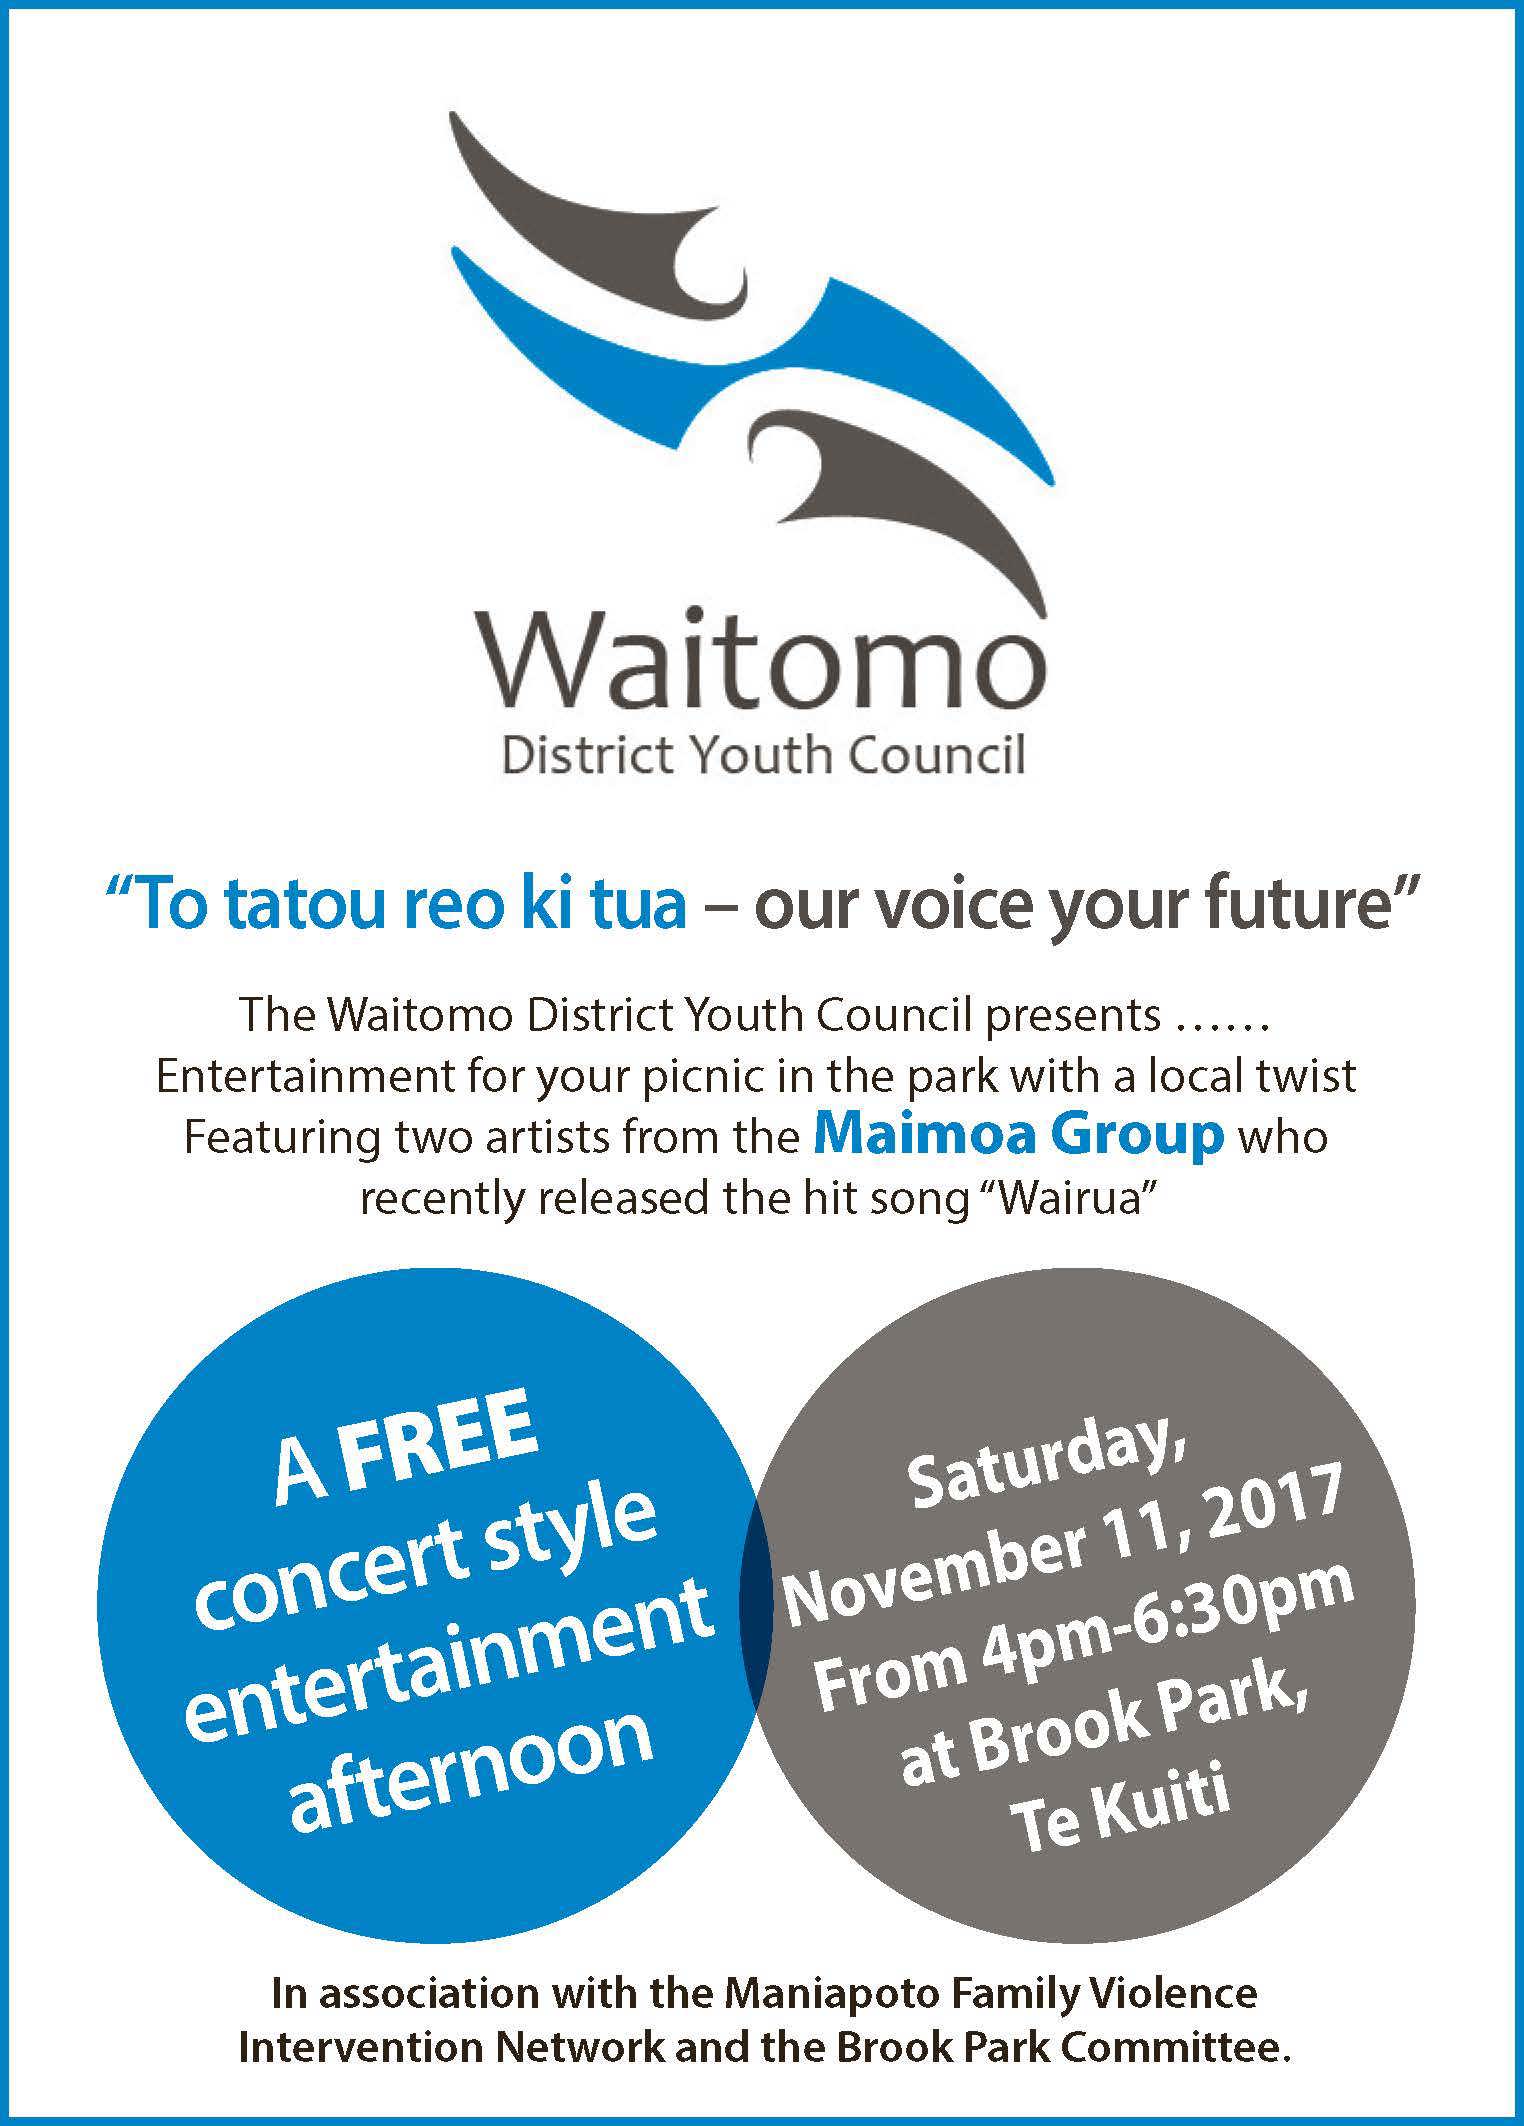 Waitomo District Youth Council 2017 entertainment afternoon